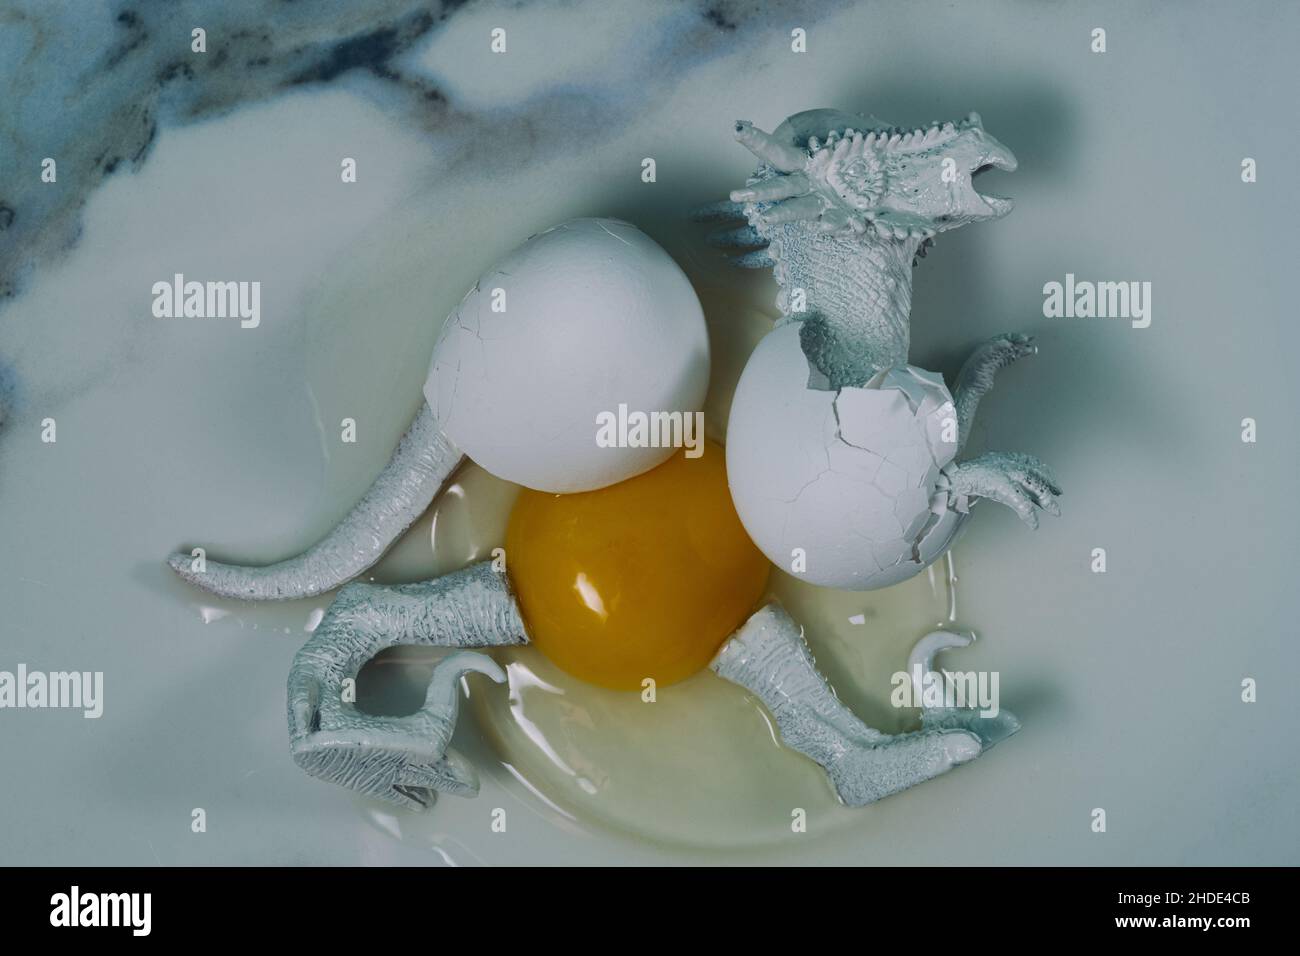 Creepy abstract hatched dead dinosaur egg with yoke concept Stock Photo